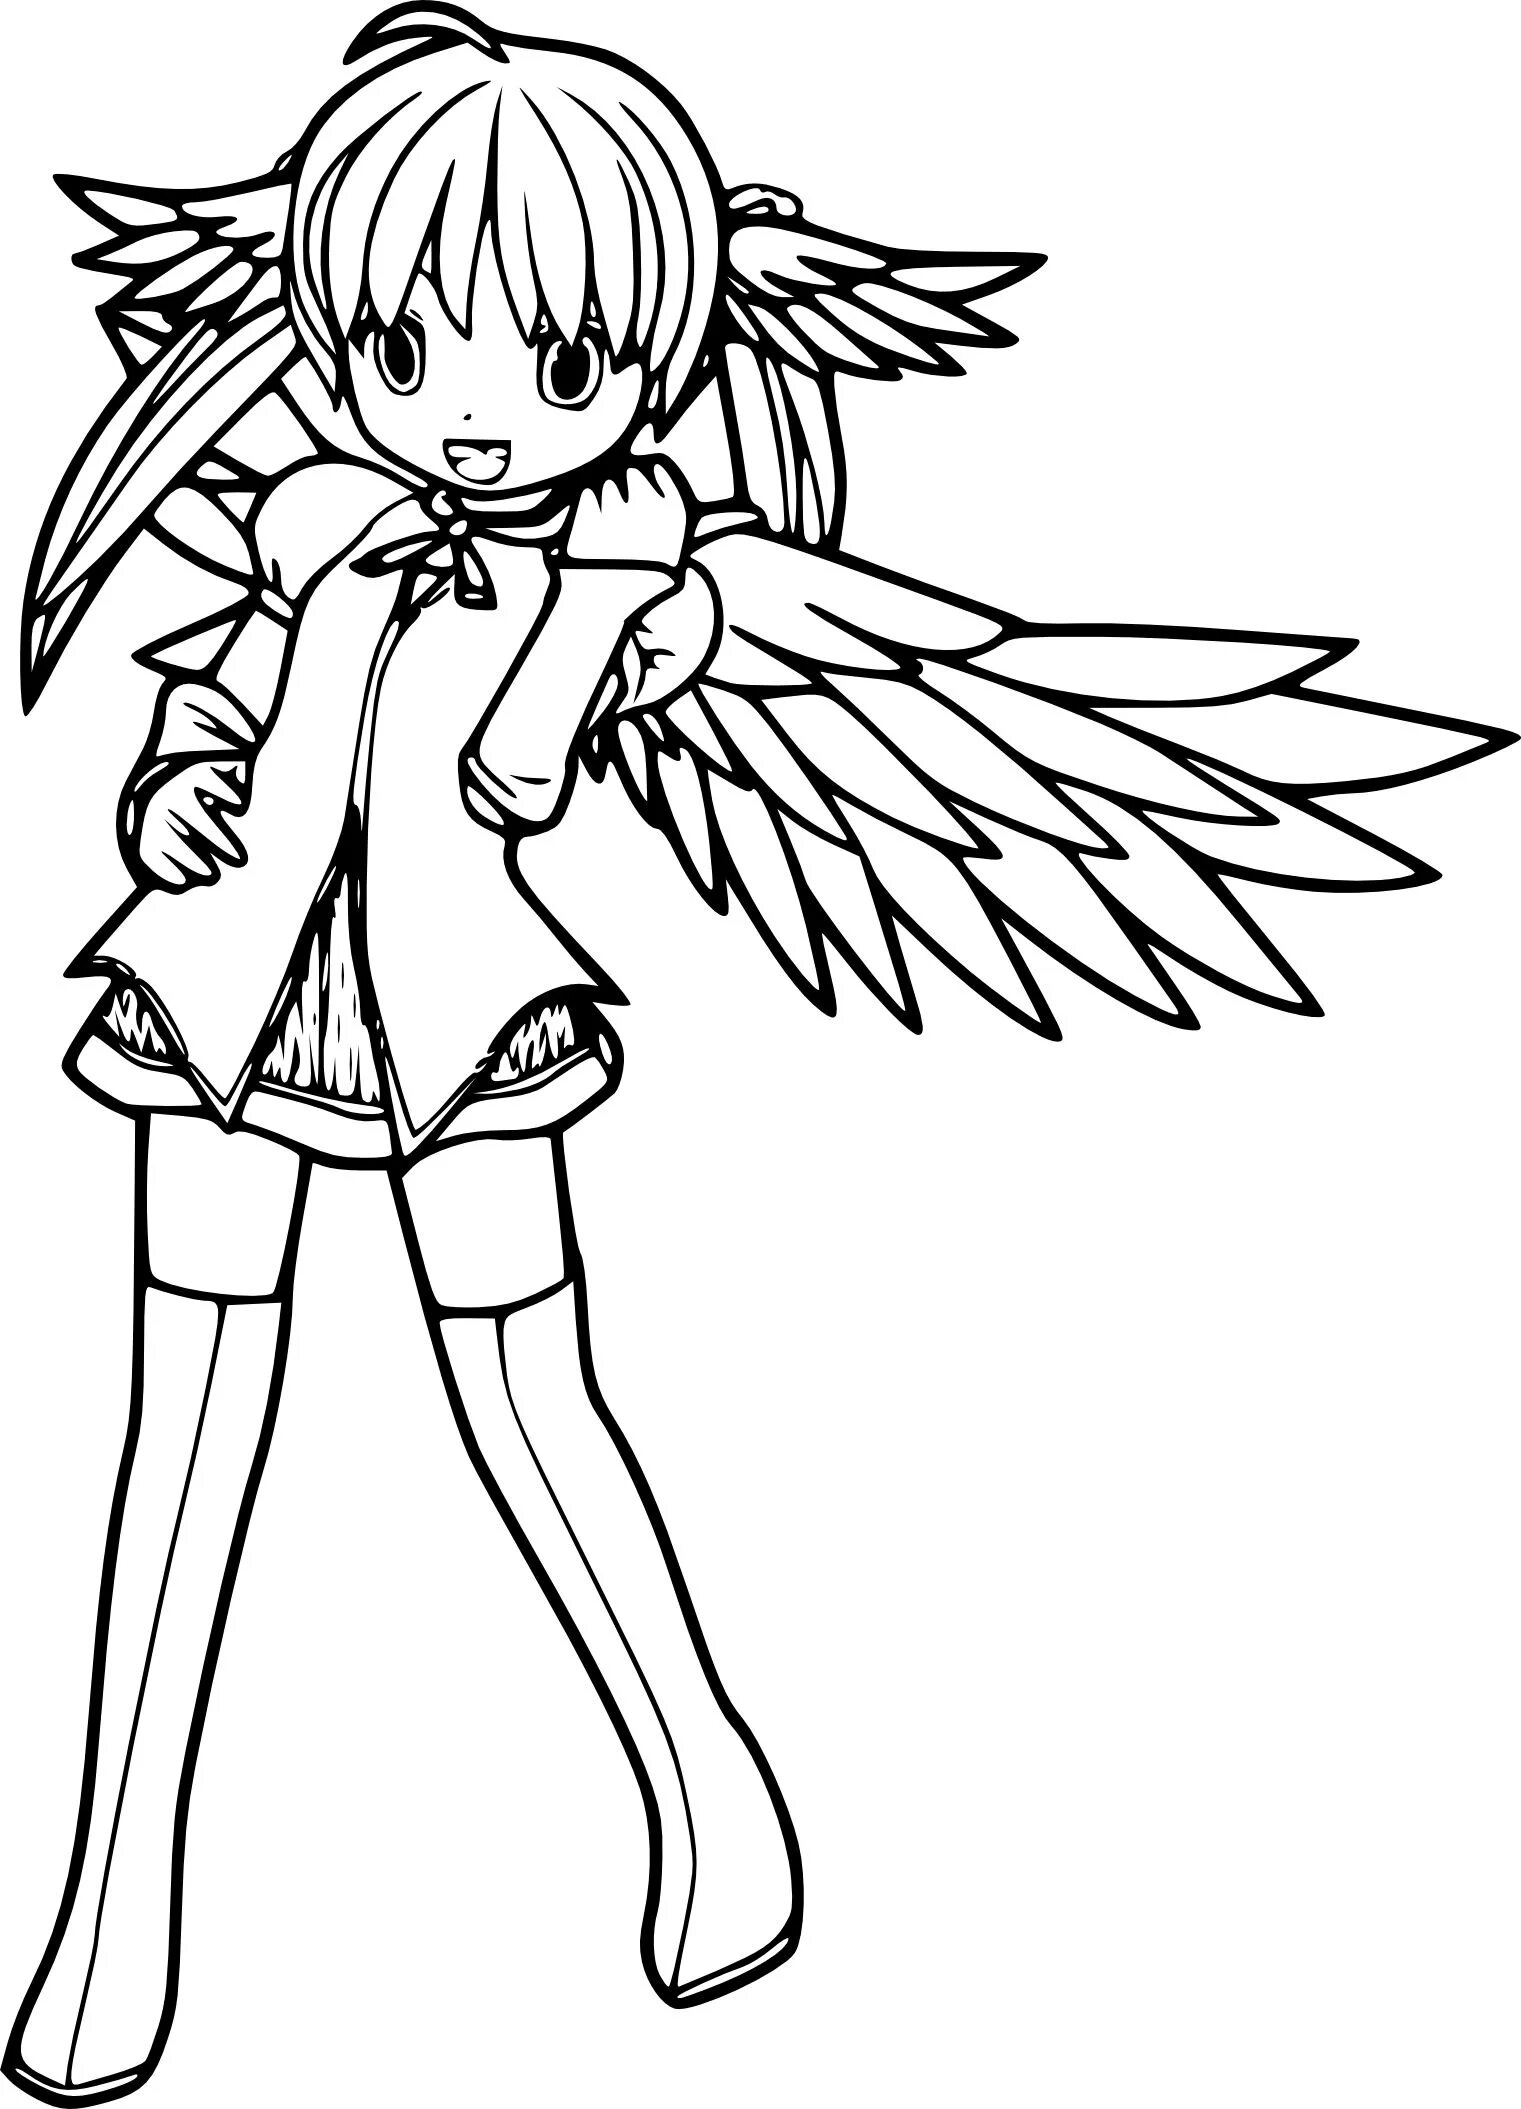 Anime with wings #1